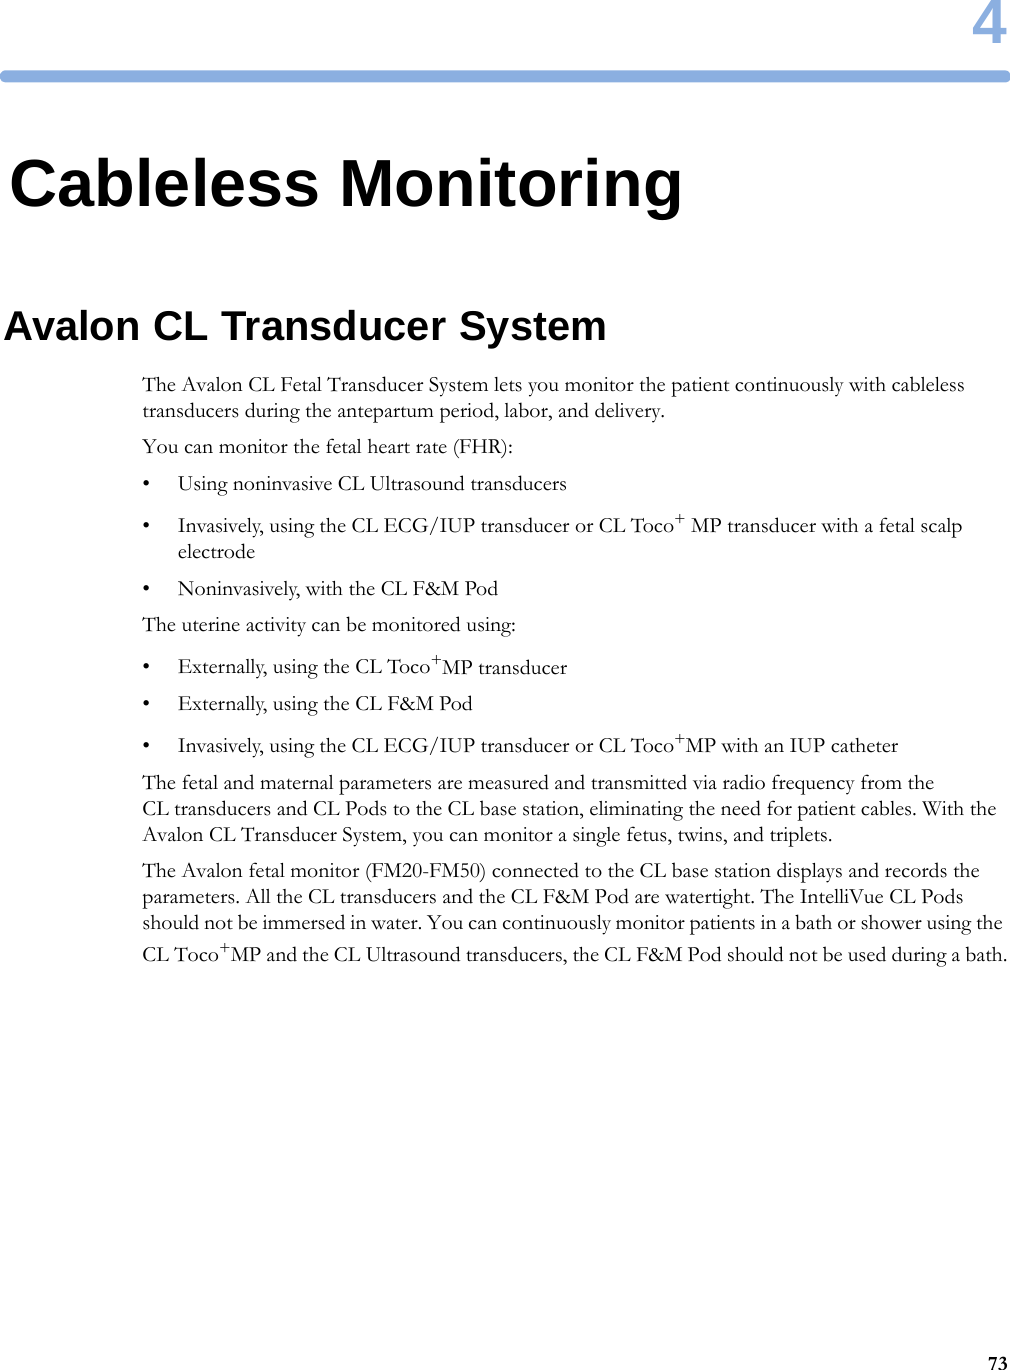 4734Cableless MonitoringAvalon CL Transducer SystemThe Avalon CL Fetal Transducer System lets you monitor the patient continuously with cableless transducers during the antepartum period, labor, and delivery.You can monitor the fetal heart rate (FHR):• Using noninvasive CL Ultrasound transducers• Invasively, using the CL ECG/IUP transducer or CL Toco+ MP transducer with a fetal scalp electrode• Noninvasively, with the CL F&amp;M PodThe uterine activity can be monitored using:• Externally, using the CL Toco+MP transducer• Externally, using the CL F&amp;M Pod• Invasively, using the CL ECG/IUP transducer or CL Toco+MP with an IUP catheterThe fetal and maternal parameters are measured and transmitted via radio frequency from the CL transducers and CL Pods to the CL base station, eliminating the need for patient cables. With the Avalon CL Transducer System, you can monitor a single fetus, twins, and triplets.The Avalon fetal monitor (FM20-FM50) connected to the CL base station displays and records the parameters. All the CL transducers and the CL F&amp;M Pod are watertight. The IntelliVue CL Pods should not be immersed in water. You can continuously monitor patients in a bath or shower using the CL Toco+MP and the CL Ultrasound transducers, the CL F&amp;M Pod should not be used during a bath.